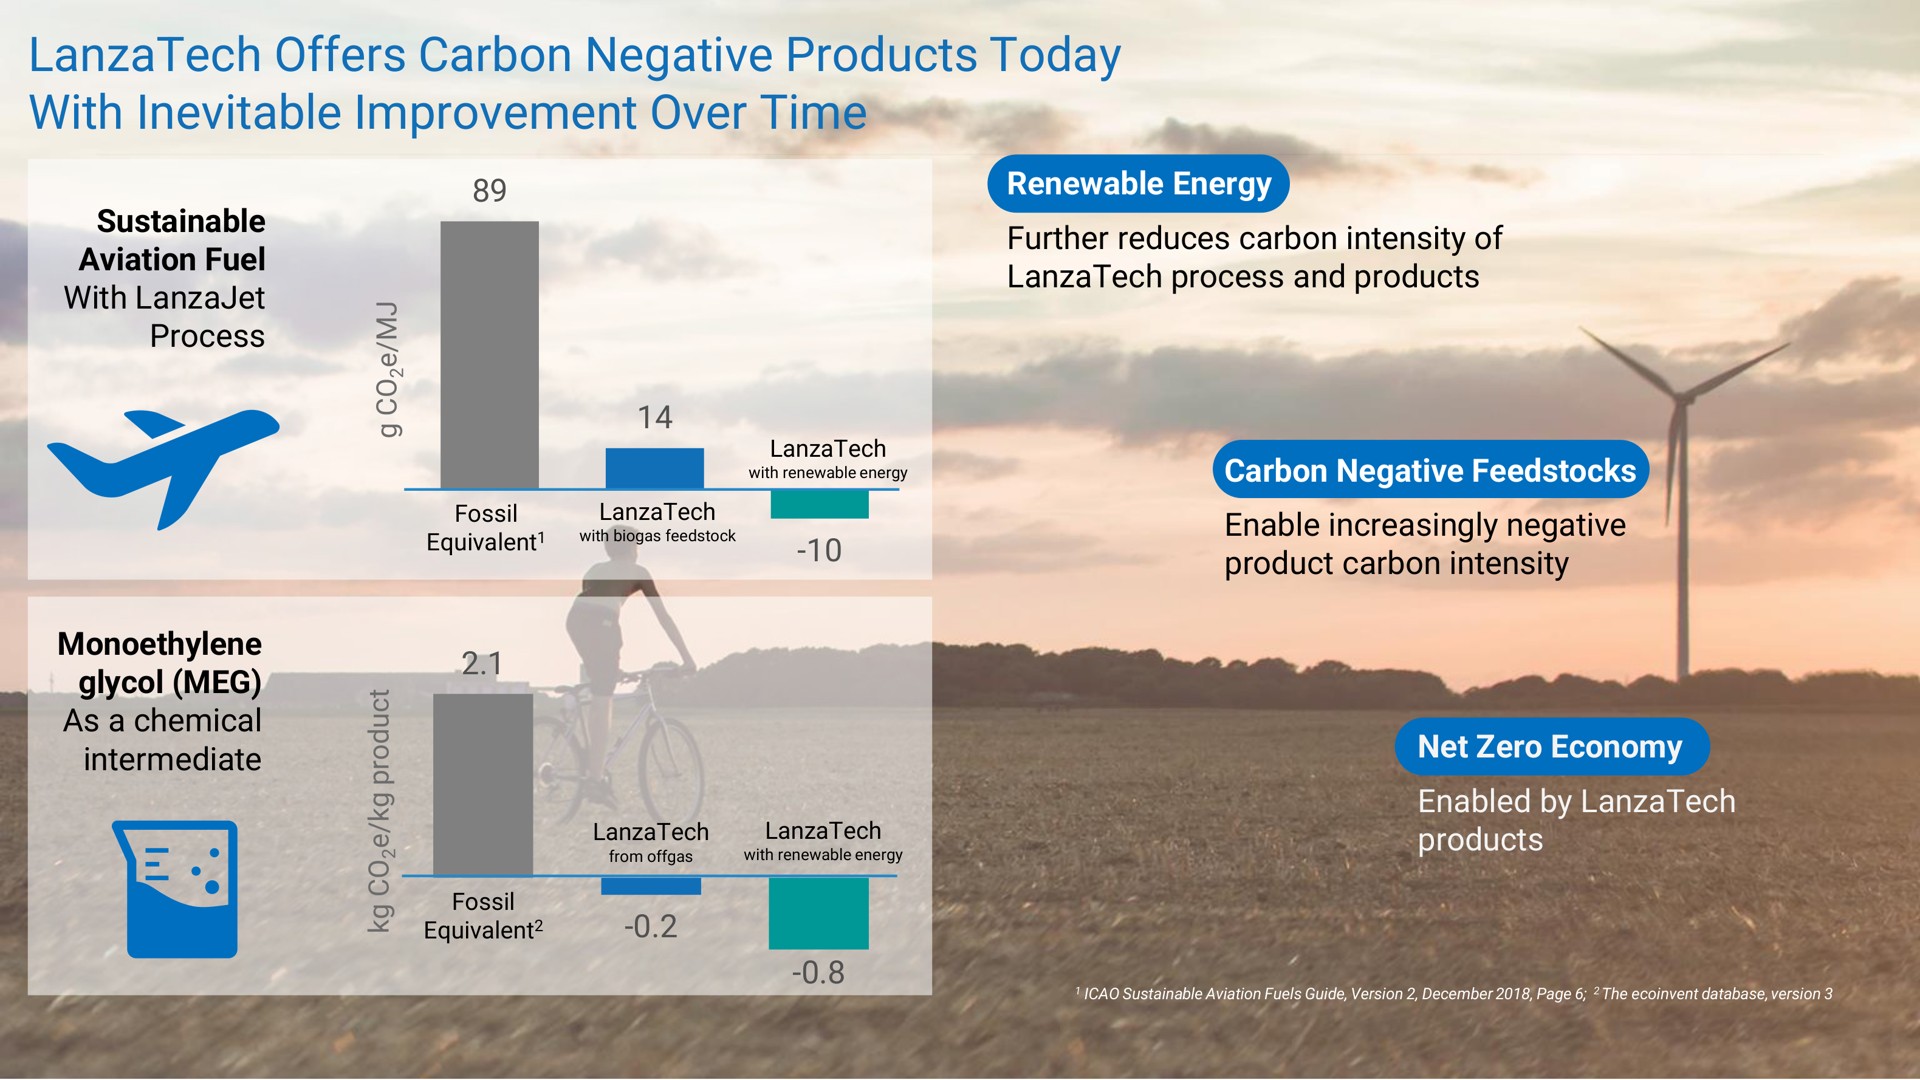 offers carbon negative products today with inevitable improvement over time | LanzaTech